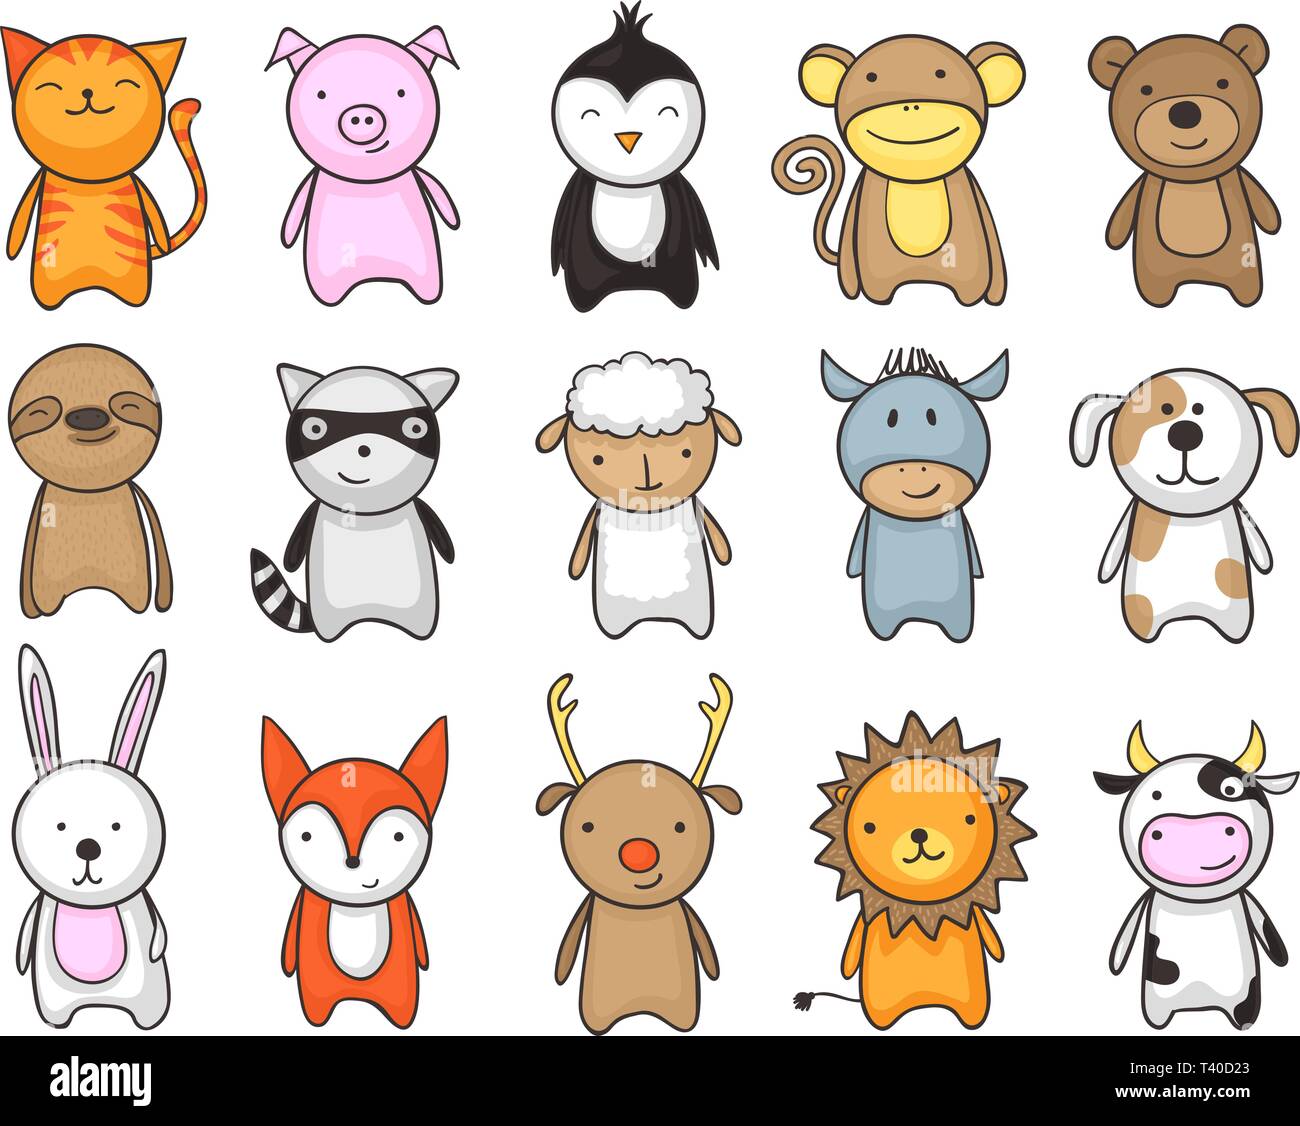 Simple and childish drawing of cute toy animals for kids Stock Vector